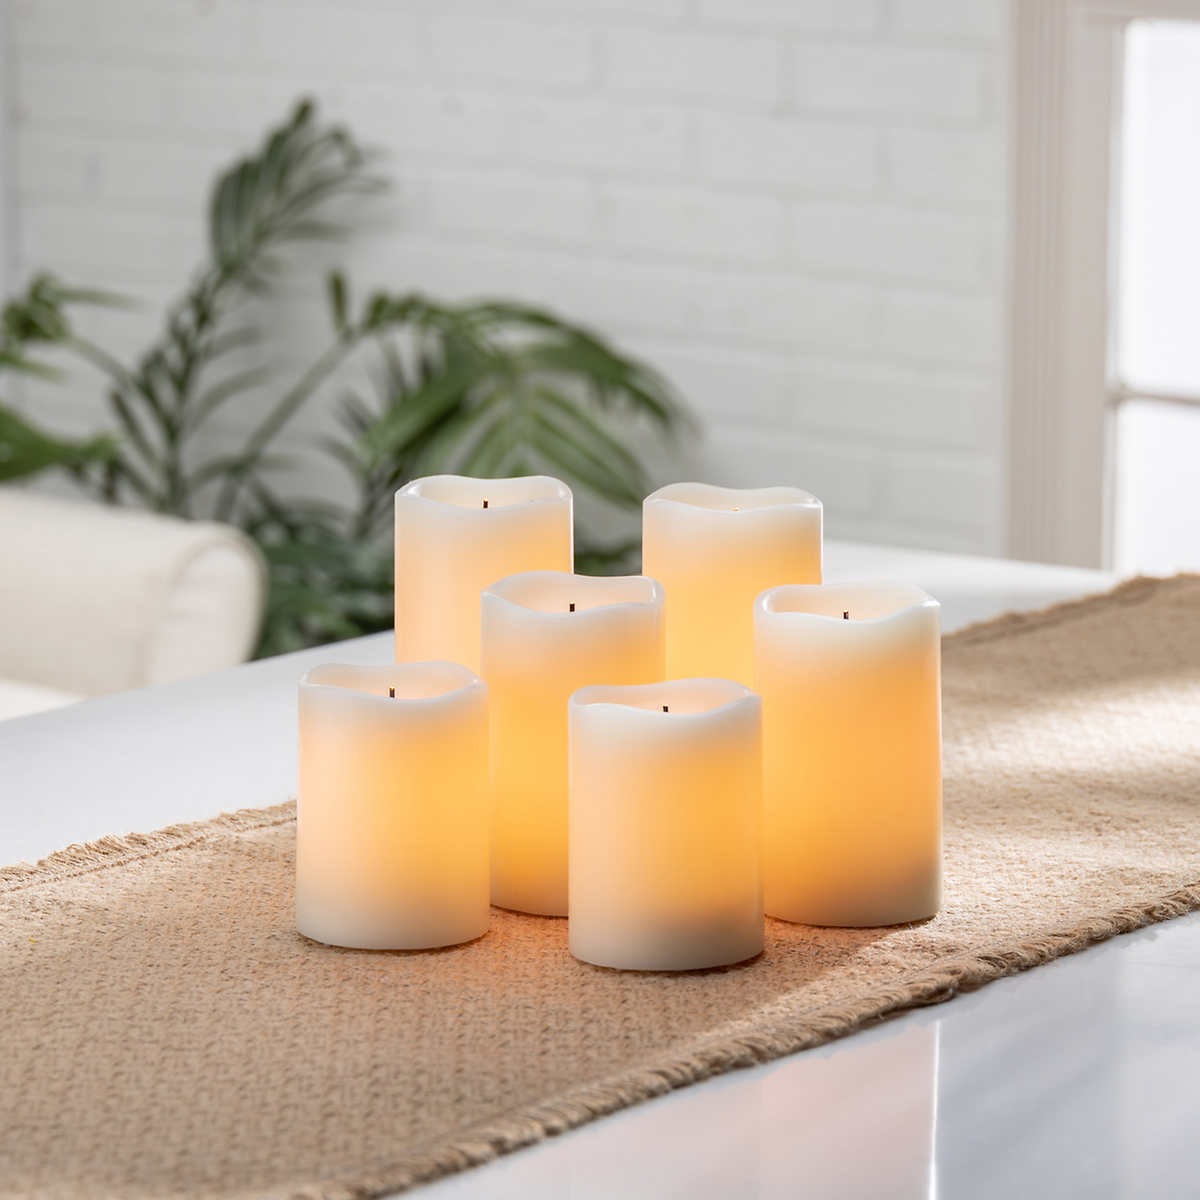 Gerson Glow Wick LED Color Changing Wax Candles, 6-piece